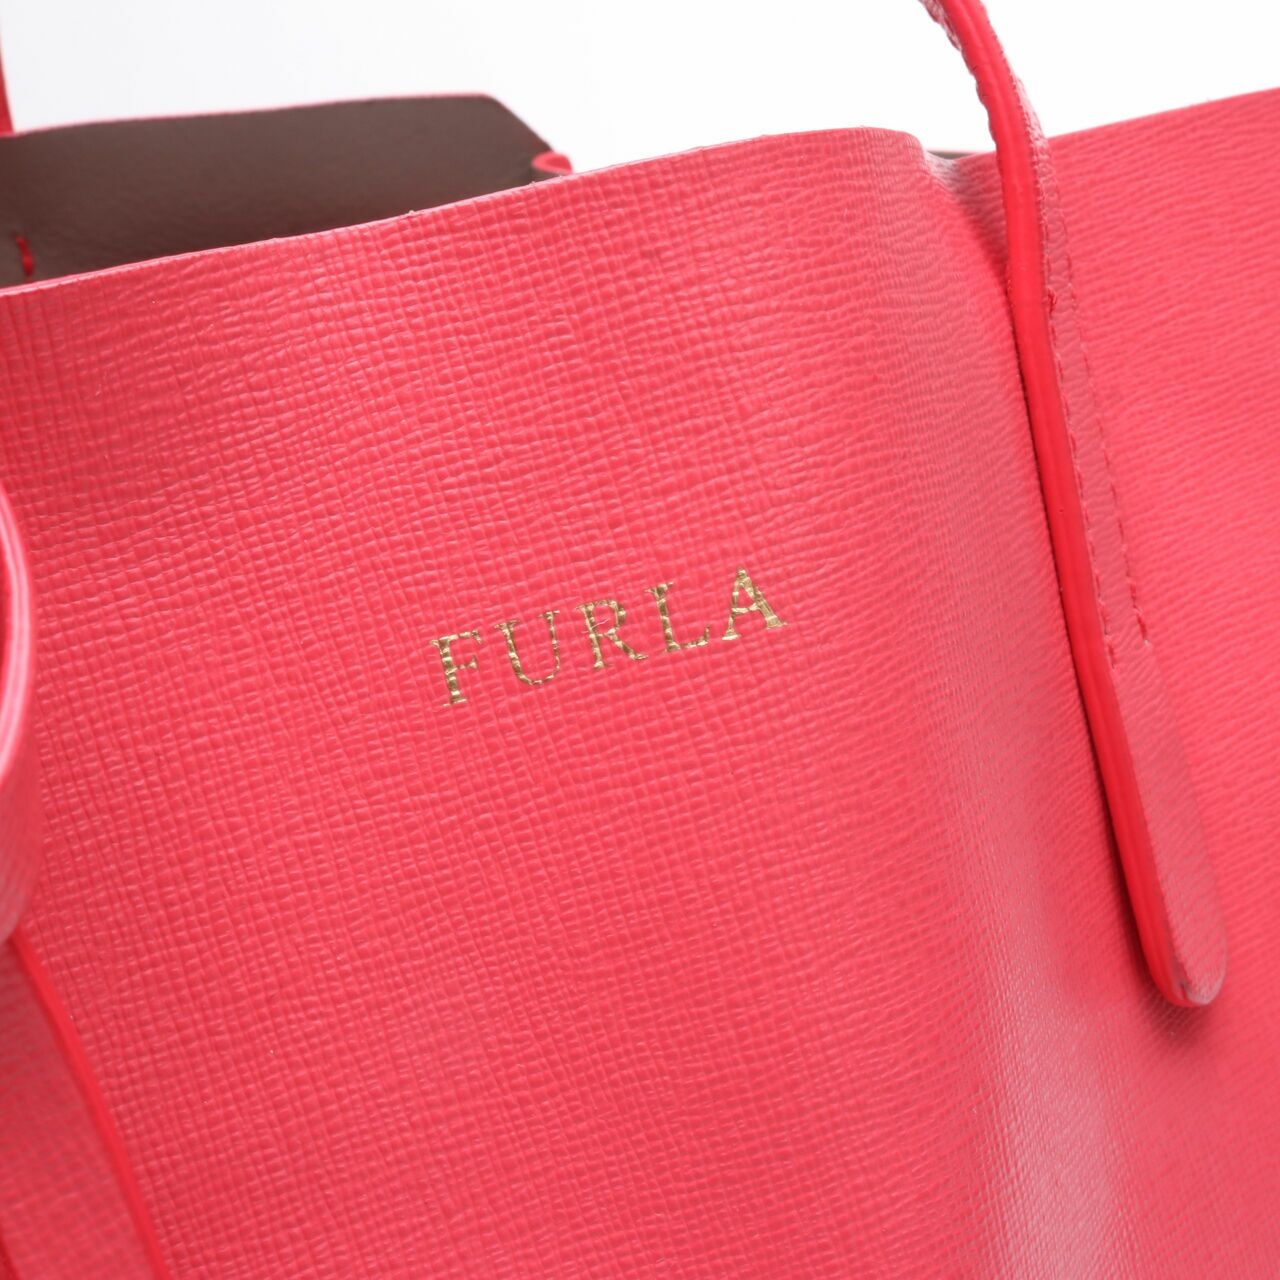 Furla Sally Tote Red